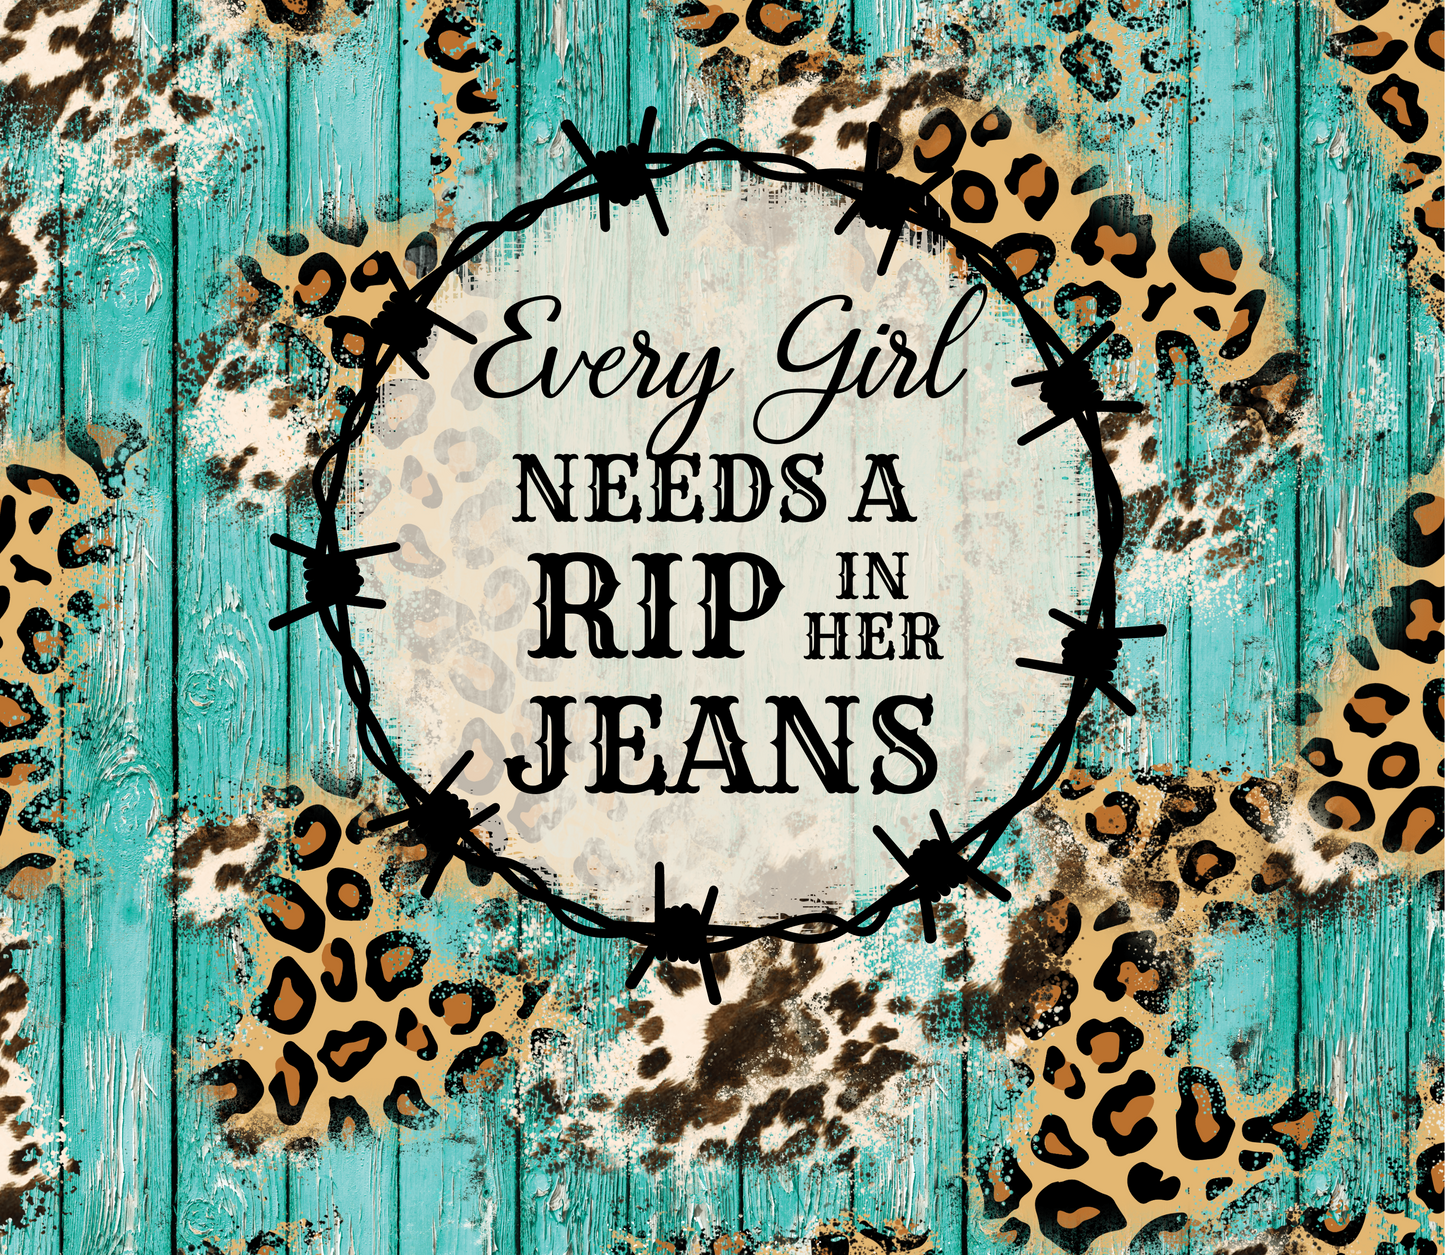 EVERY GIRL NEEDS A RIP IN HER JEANS